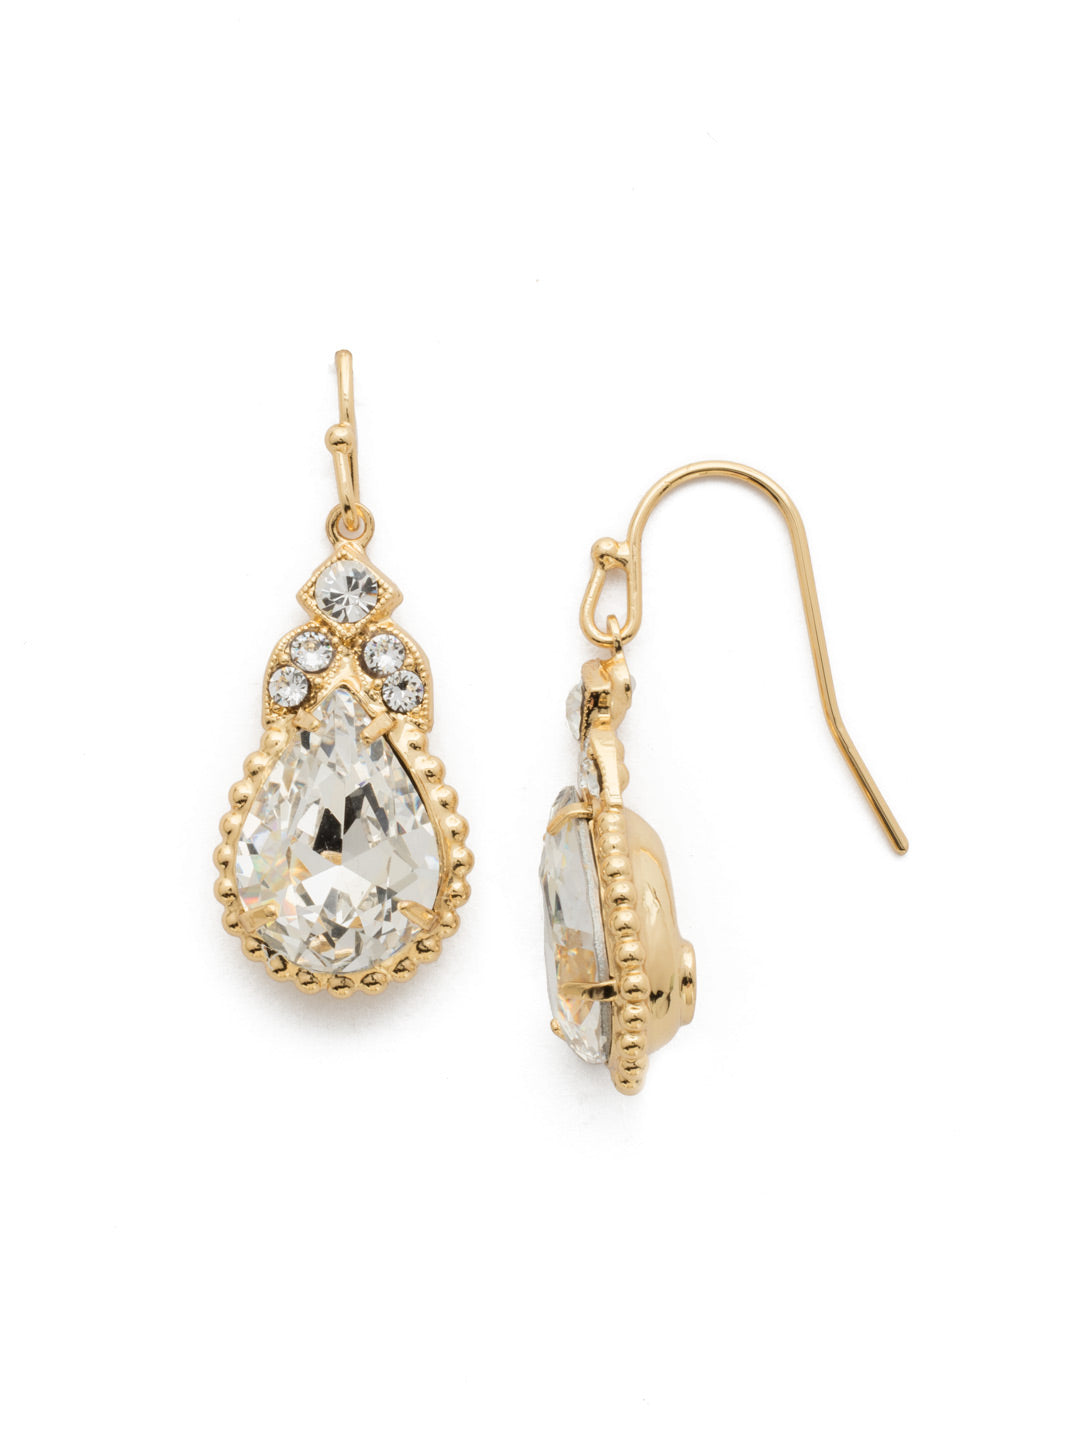 Decorative Deco Dangle Earrings - EDP22BGCRY - <p>A embellished pear cut crystal sits beneath a deco-inspired design for a dazzling look that works for any occasion. From Sorrelli's Crystal collection in our Bright Gold-tone finish.</p>